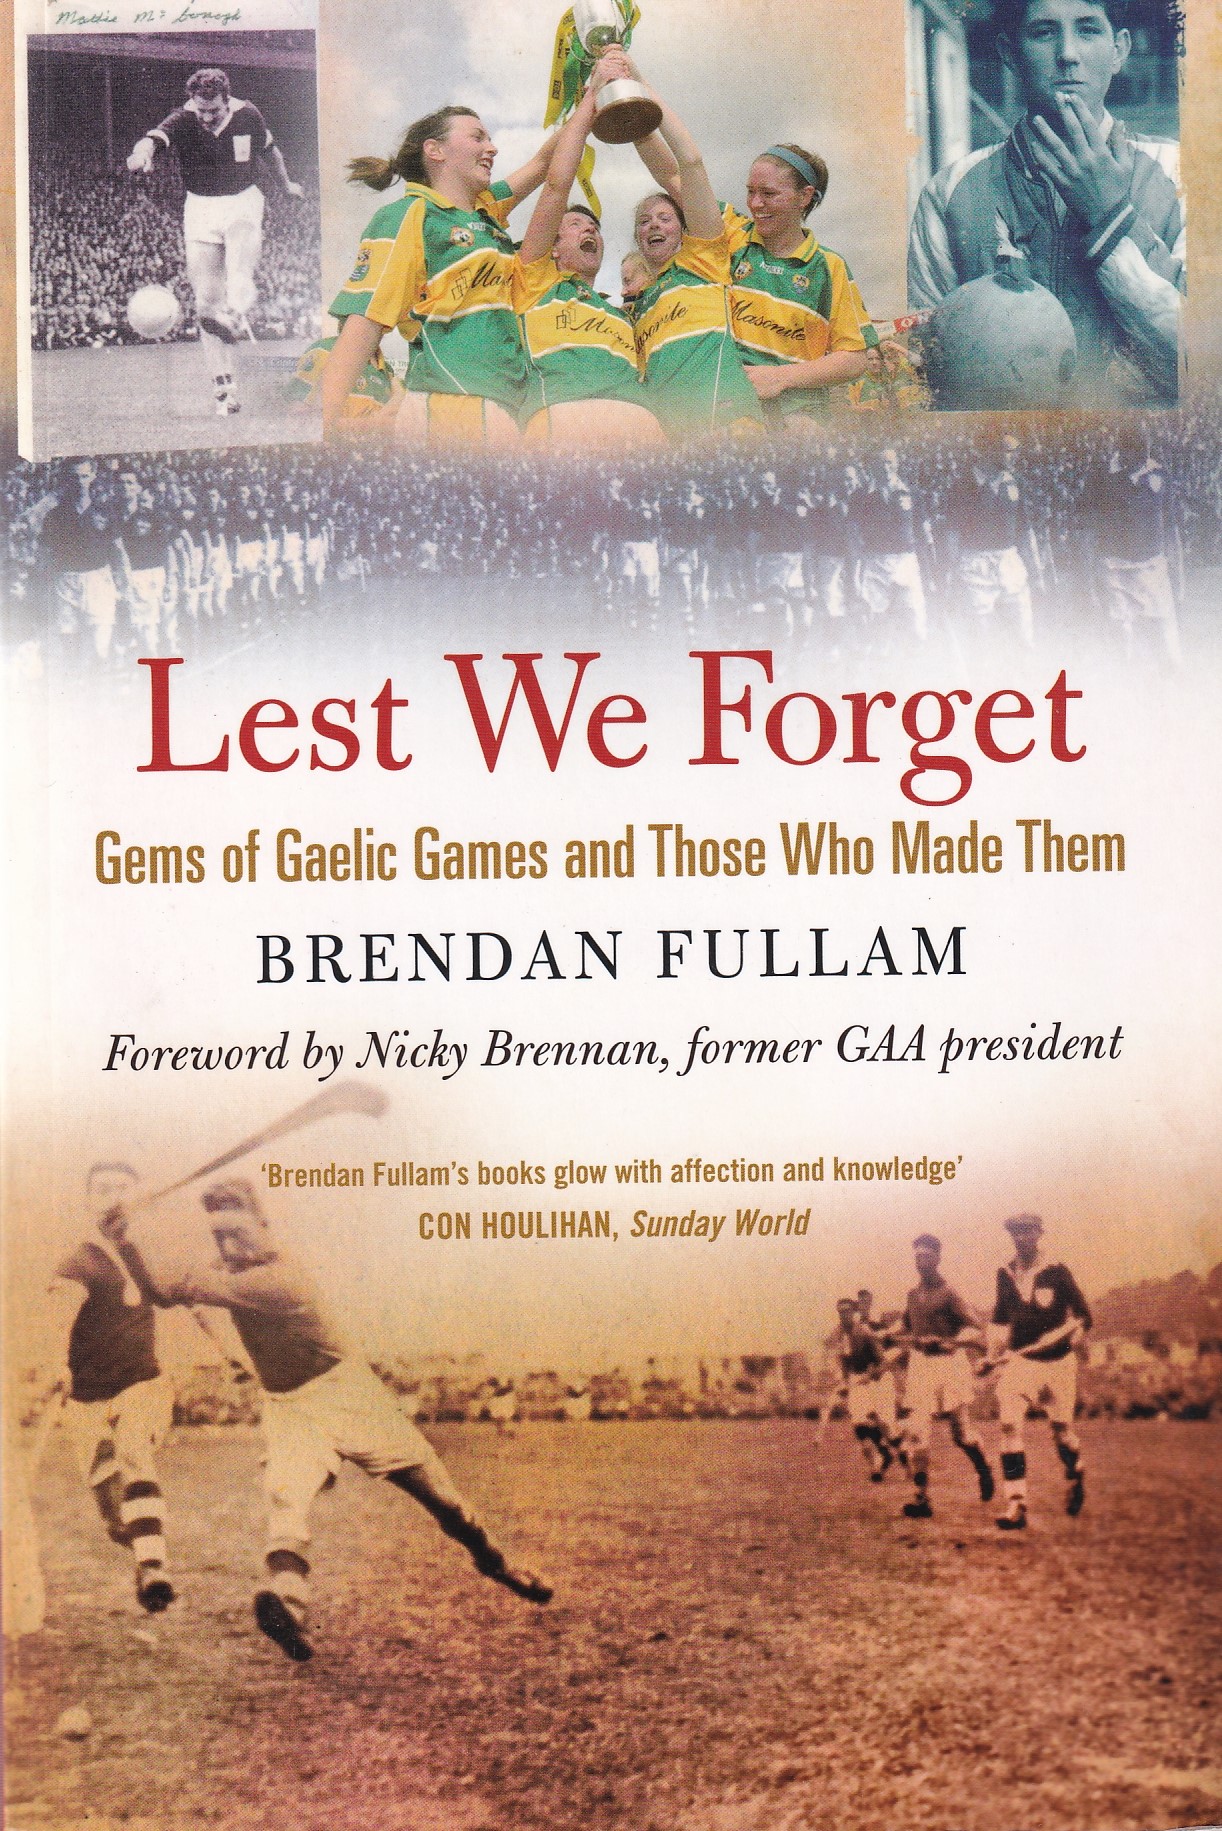 Lest We Forget: Gems of Gaelic Games and Those Who Made Them by Brendan Fullam